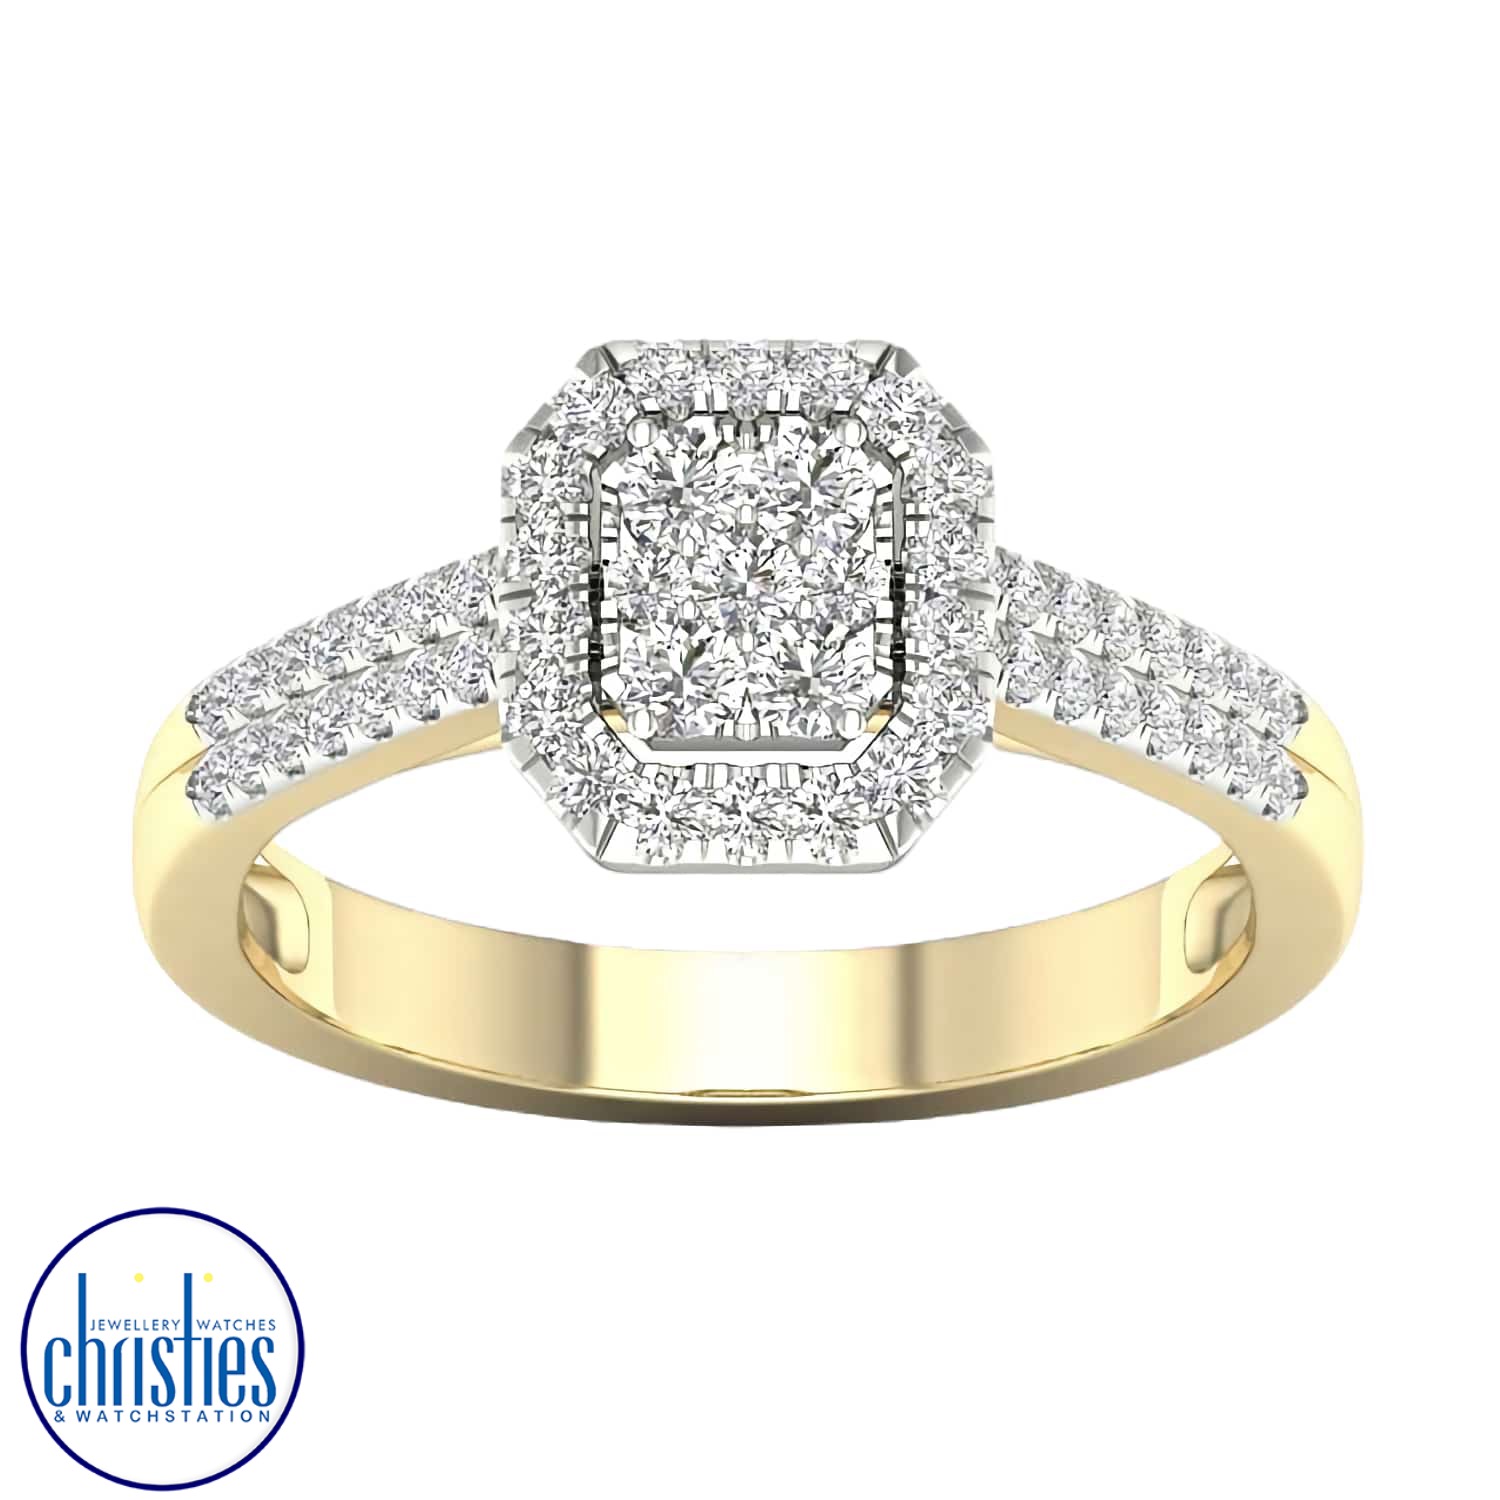 9ct Yellow Gold Diamond Ring 0.50ct TDW RB15683EG. A 99ct Yellow Gold Diamond Cluster Ring 0.50ct TDW Humm - Buy ‘Big things over $1000’ - Get approved online or in-store for up to $10,000. Depending on what you buy repay over 6, 9, 12 months all the way 